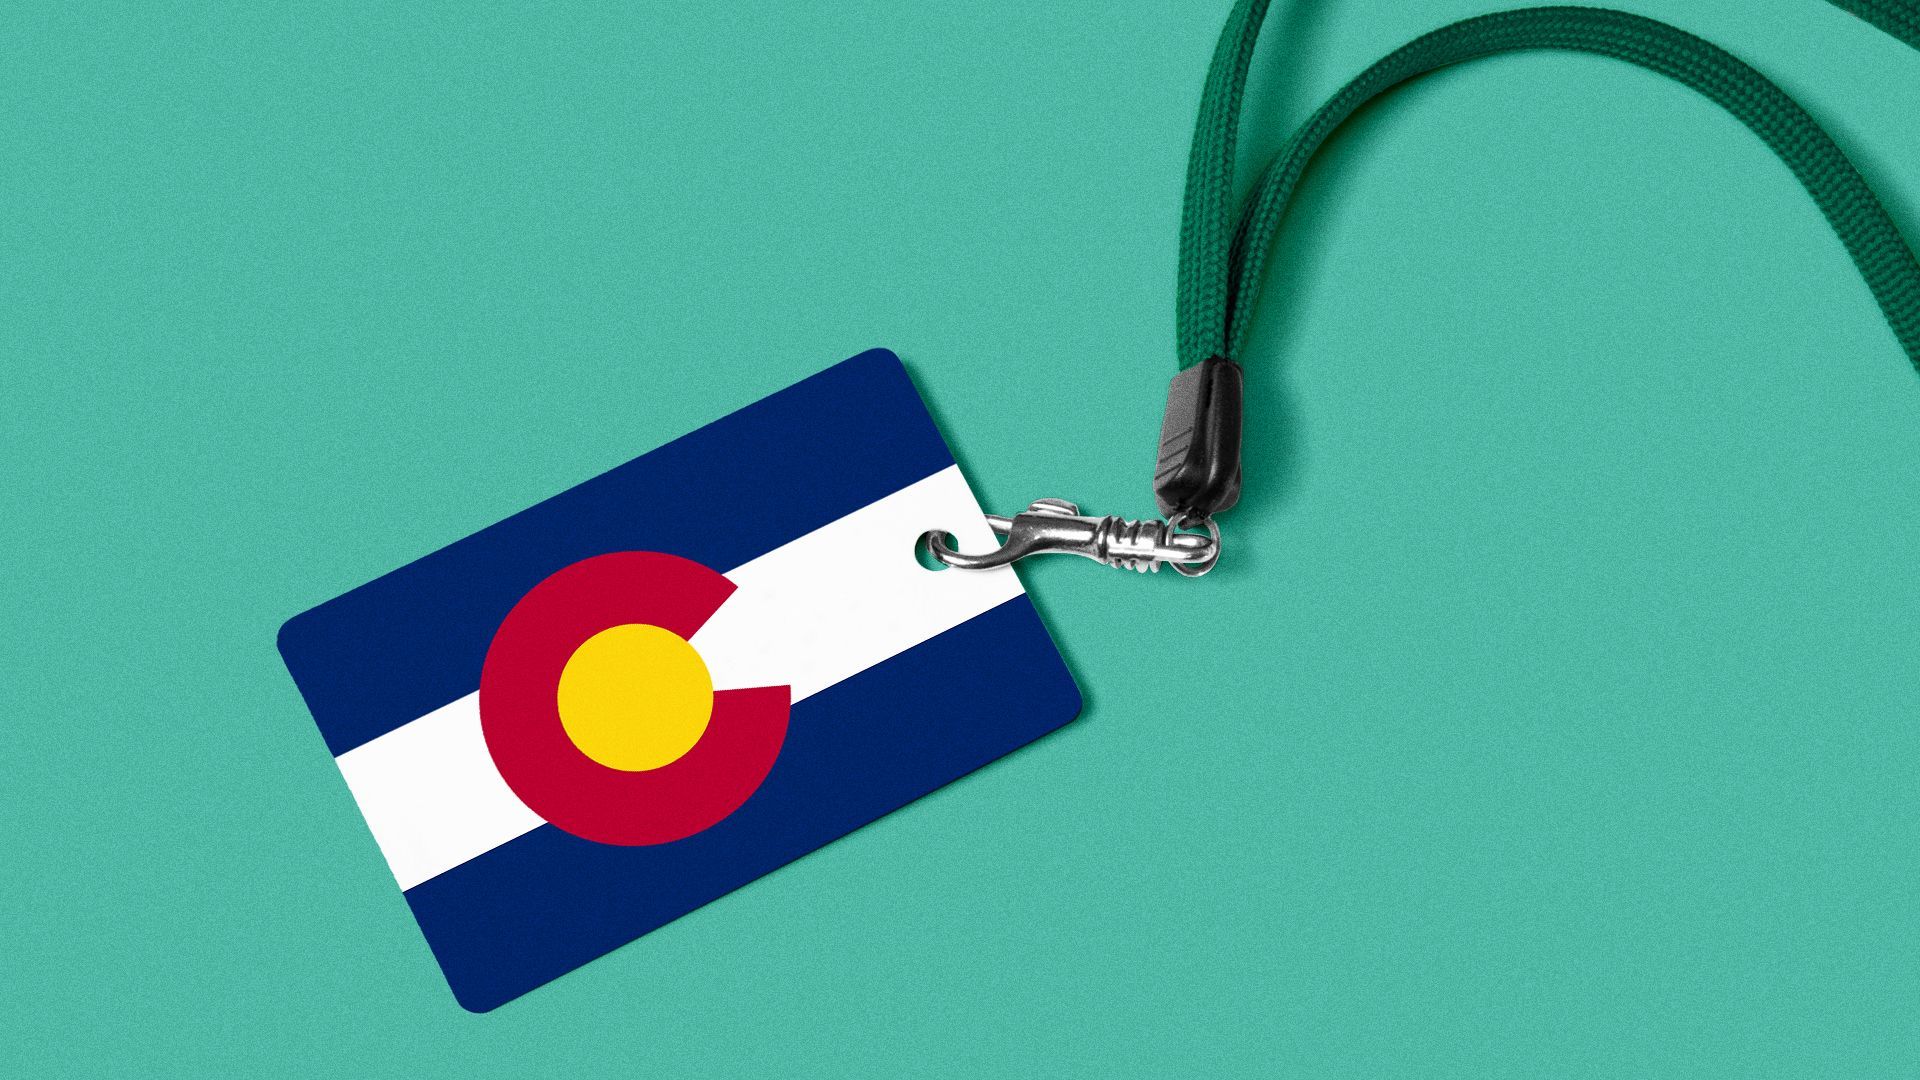 Illustration of an event lanyard with the Colorado flag. 